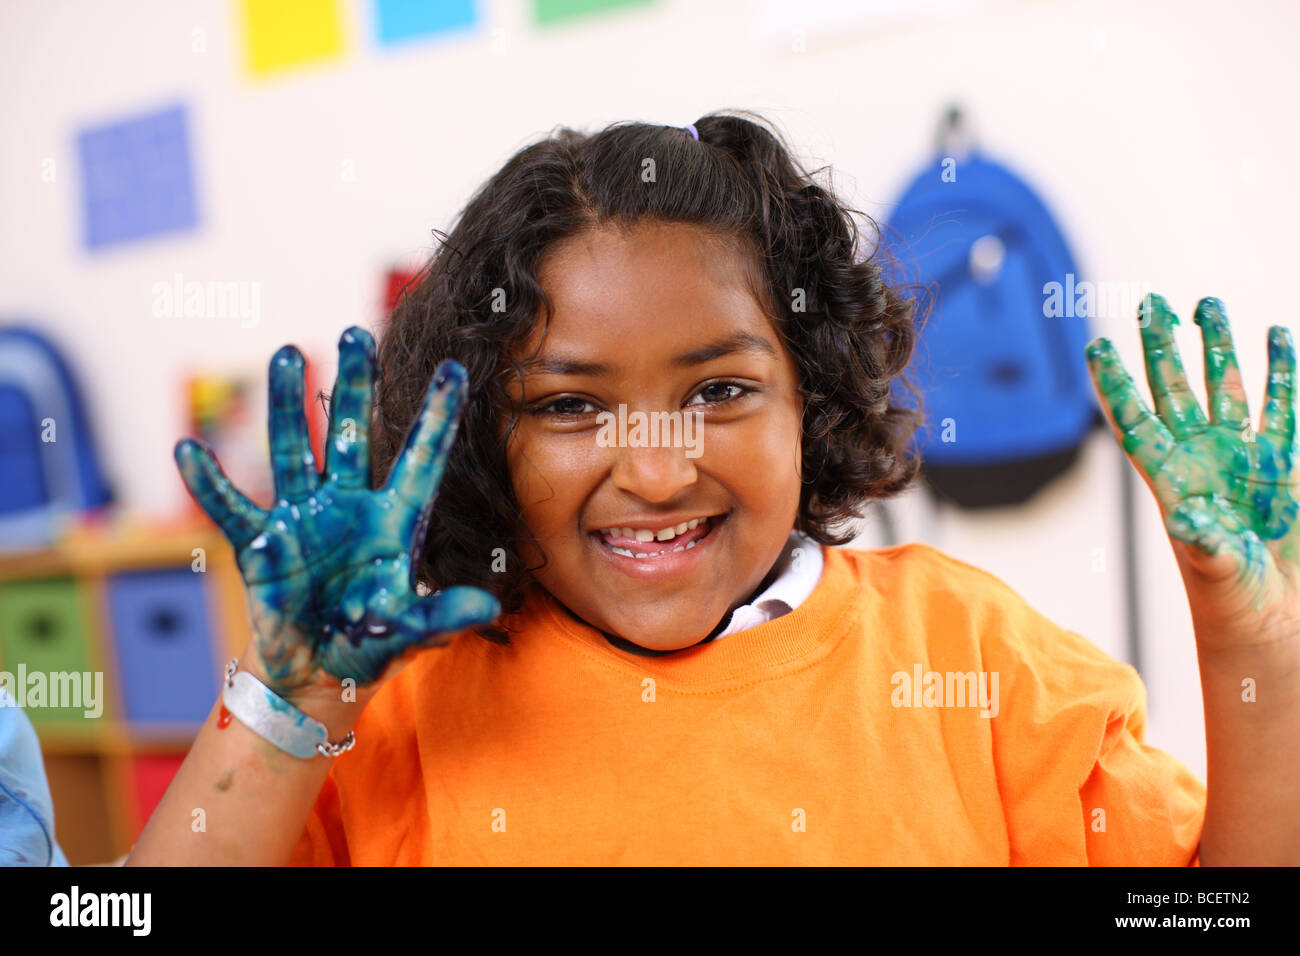 Preschool girl with hands covered in paint Stock Photo